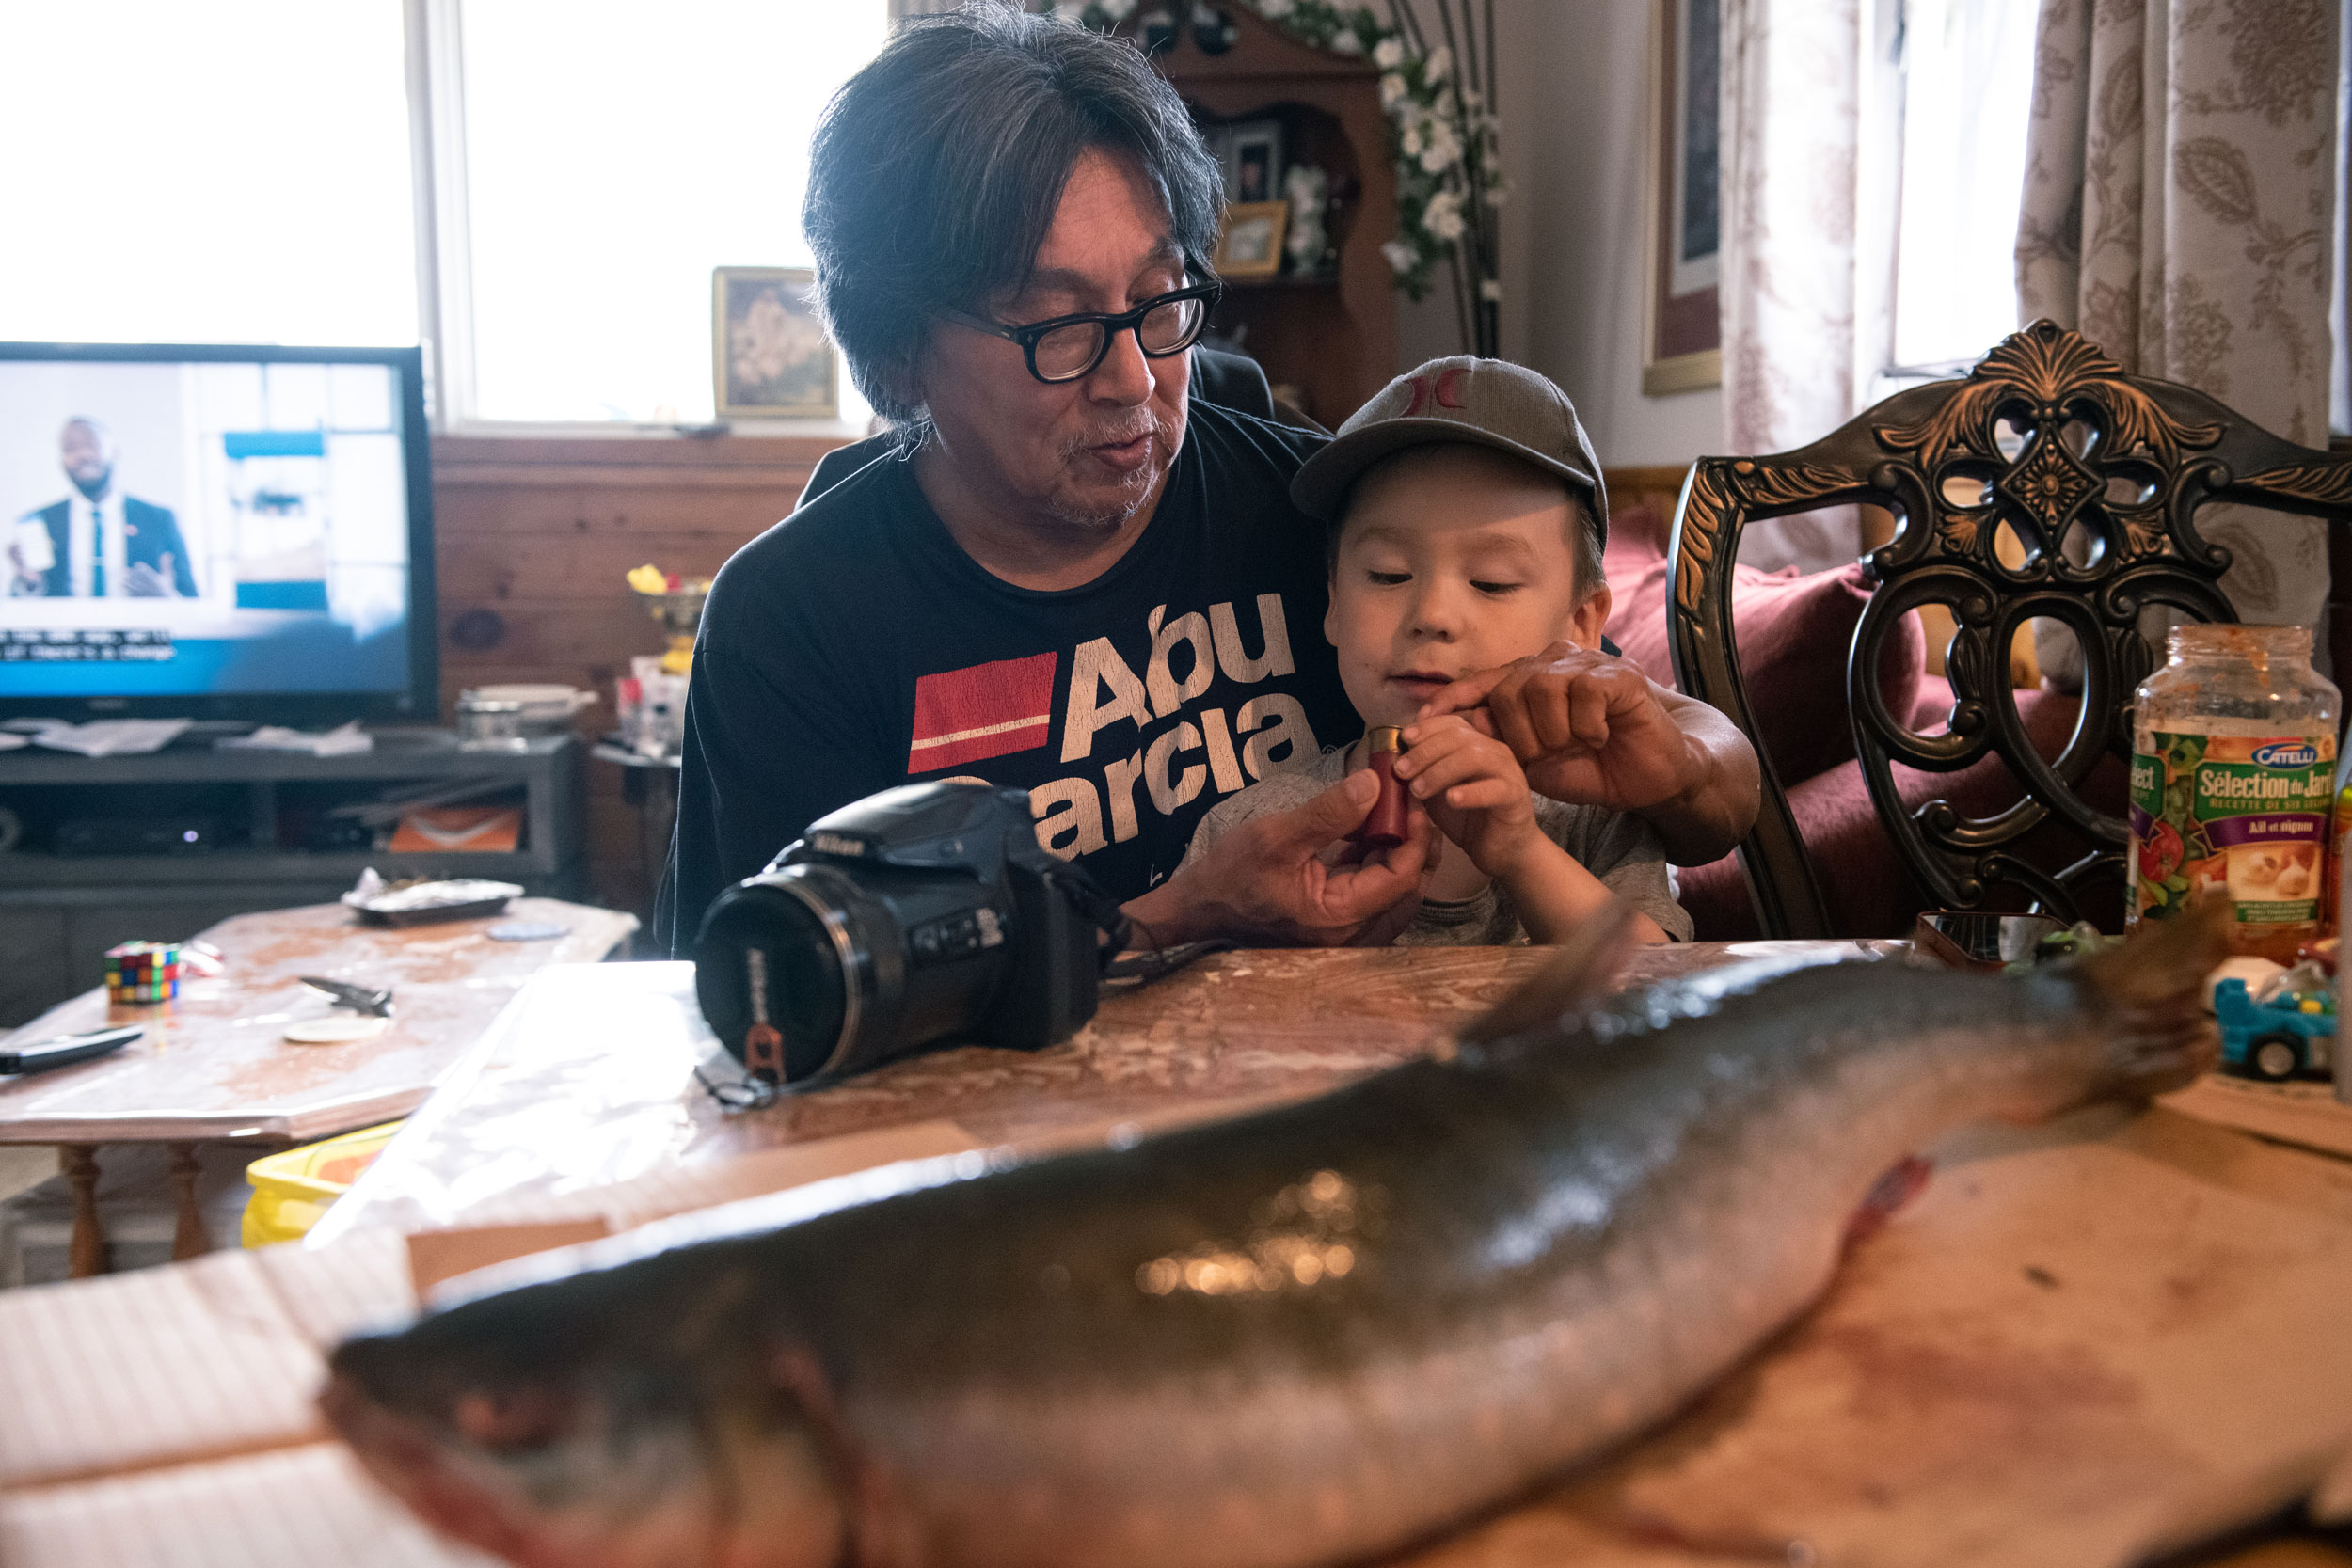 Arviat hunter Gordy Kidlapic hopes to teach his young grandson, Victor, how to harvest from and care for the changing environment around them.